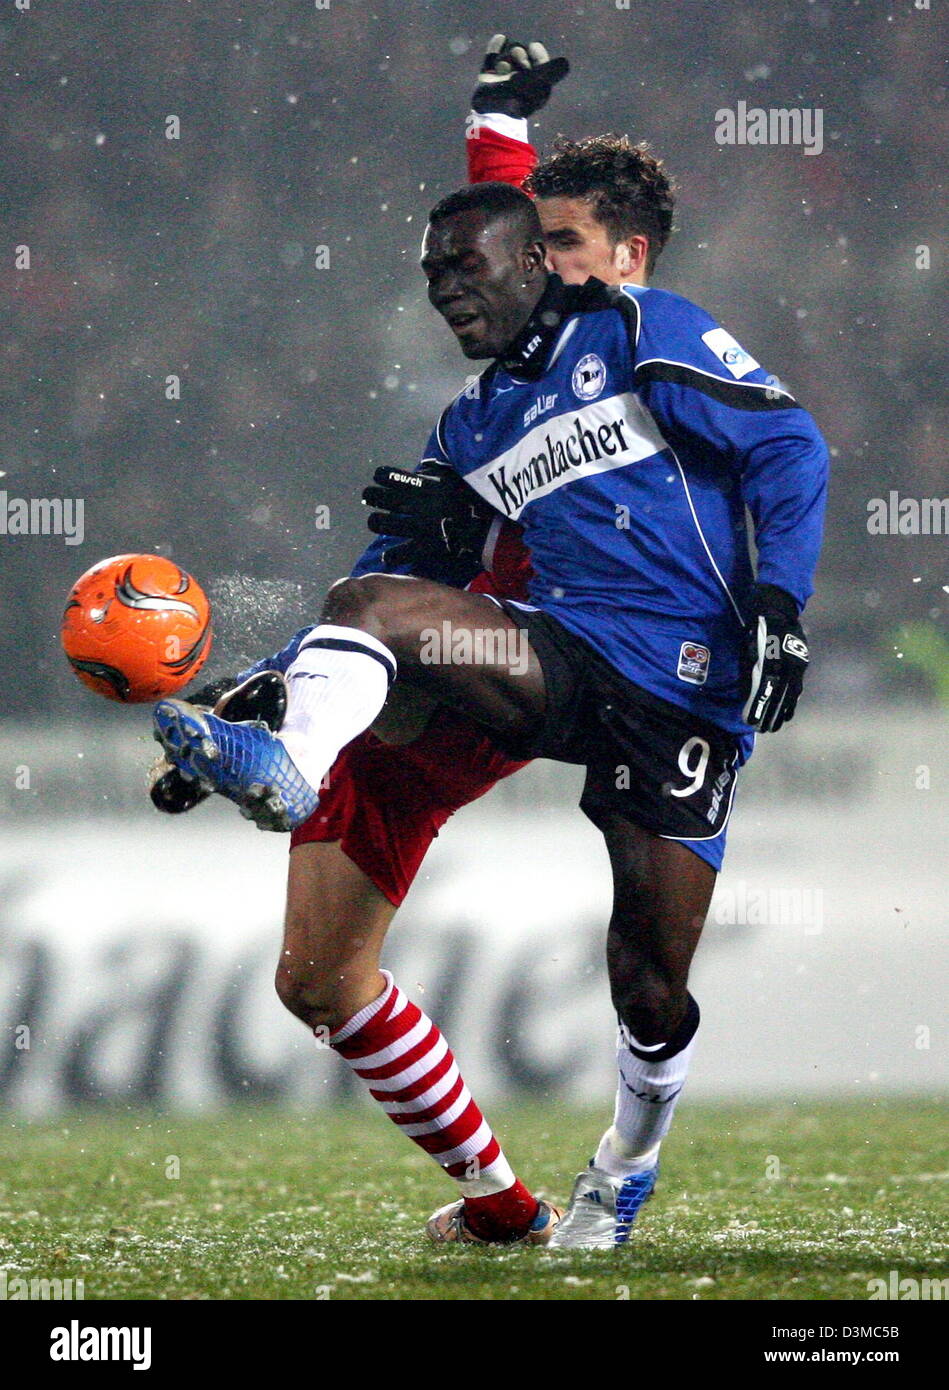 Arminia Bielefeld's Isaac Boakye fights for the ball with Kickers Offenbach's Matej Milijatovic (R) during the German Cup quarter-finals soccer match at the Schueco Arena stadium in Bielefeld, Germany, Wednesday 25 January 2006. Around12,000 spectators watched Bielefeld advance to the semi-finals after a penalty shoot-out. Photo: Franz-Peter Tschauner Stock Photo